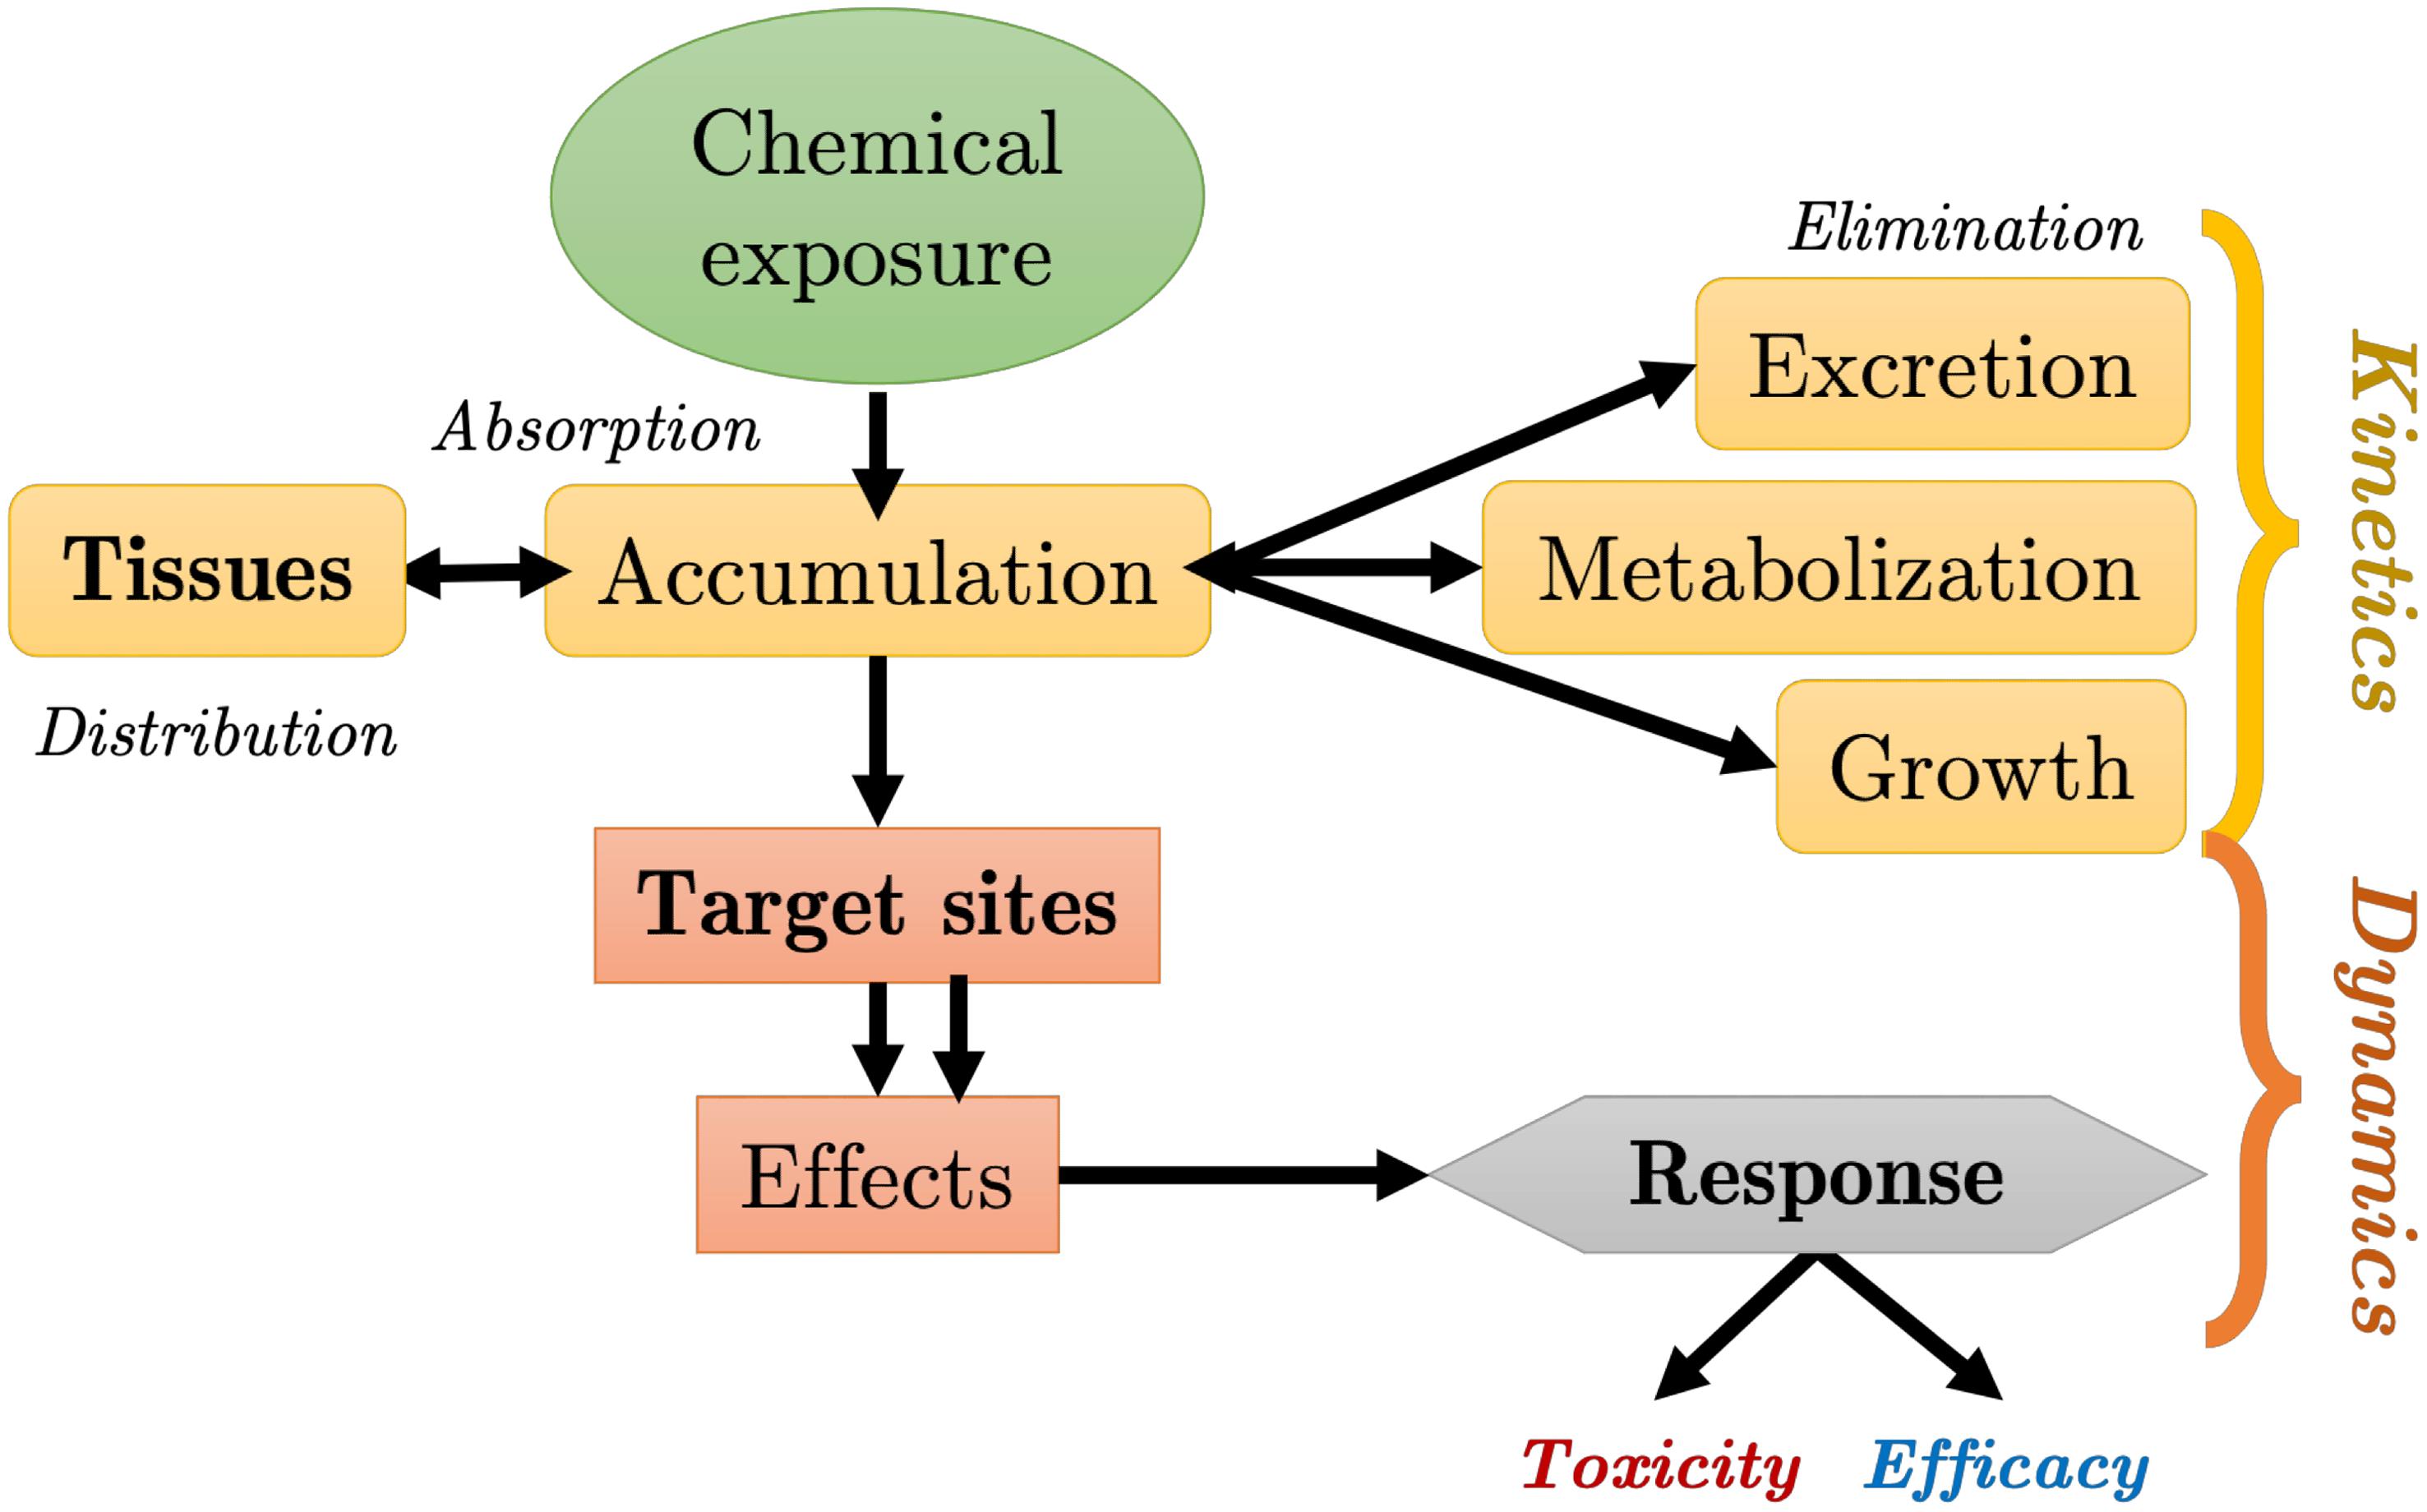 Absorption, distribution, metabolism, and excretion processes and their relationships with effects and responses within living organisms, leading to toxicity or efficacy depending on the chemical substance they are exposed to.